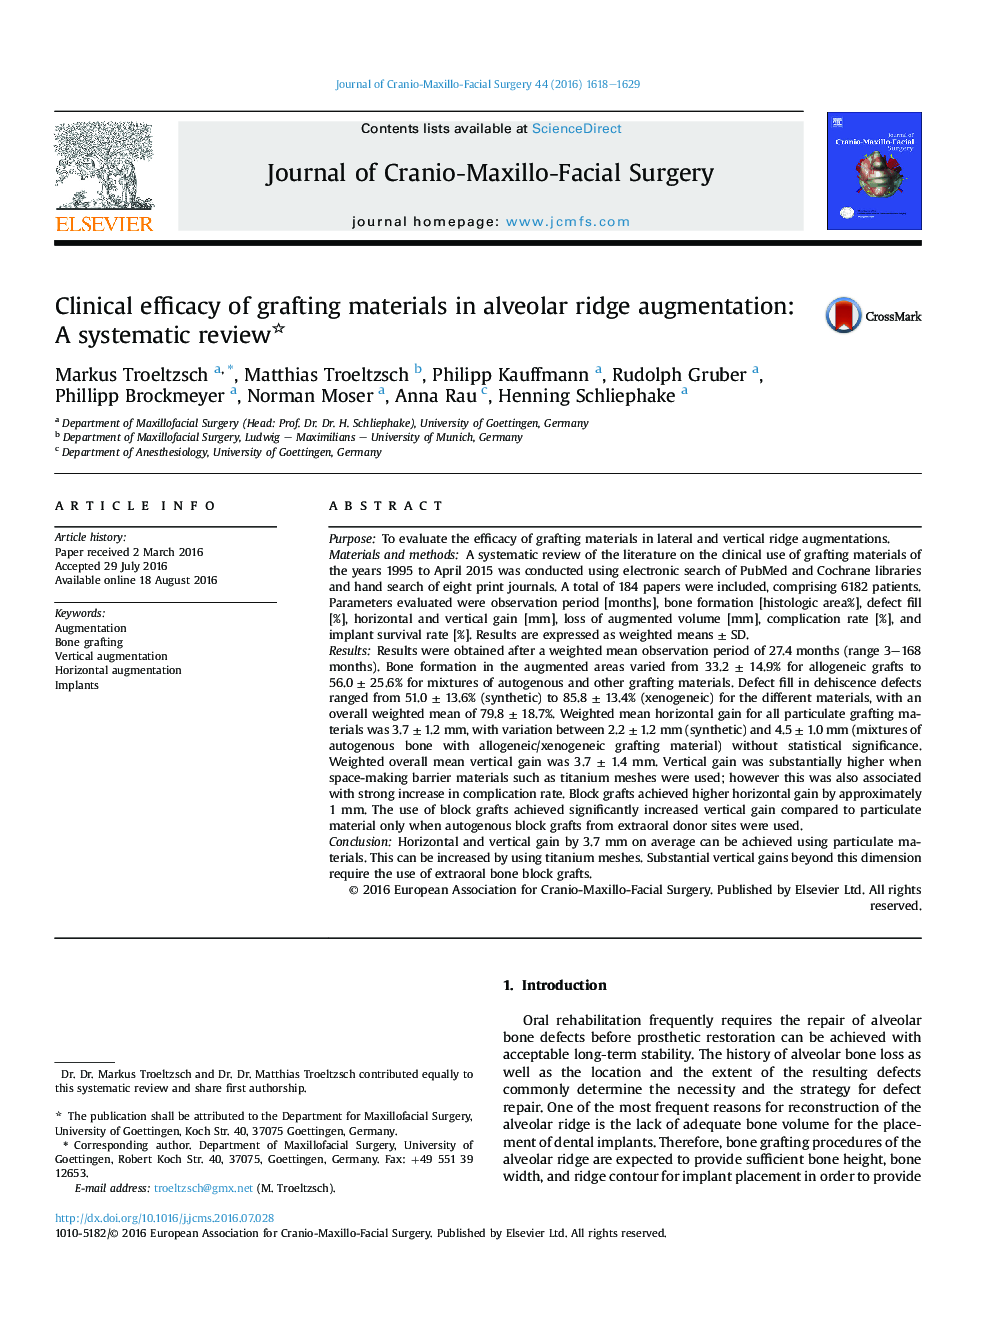 Clinical efficacy of grafting materials in alveolar ridge augmentation: AÂ systematic review